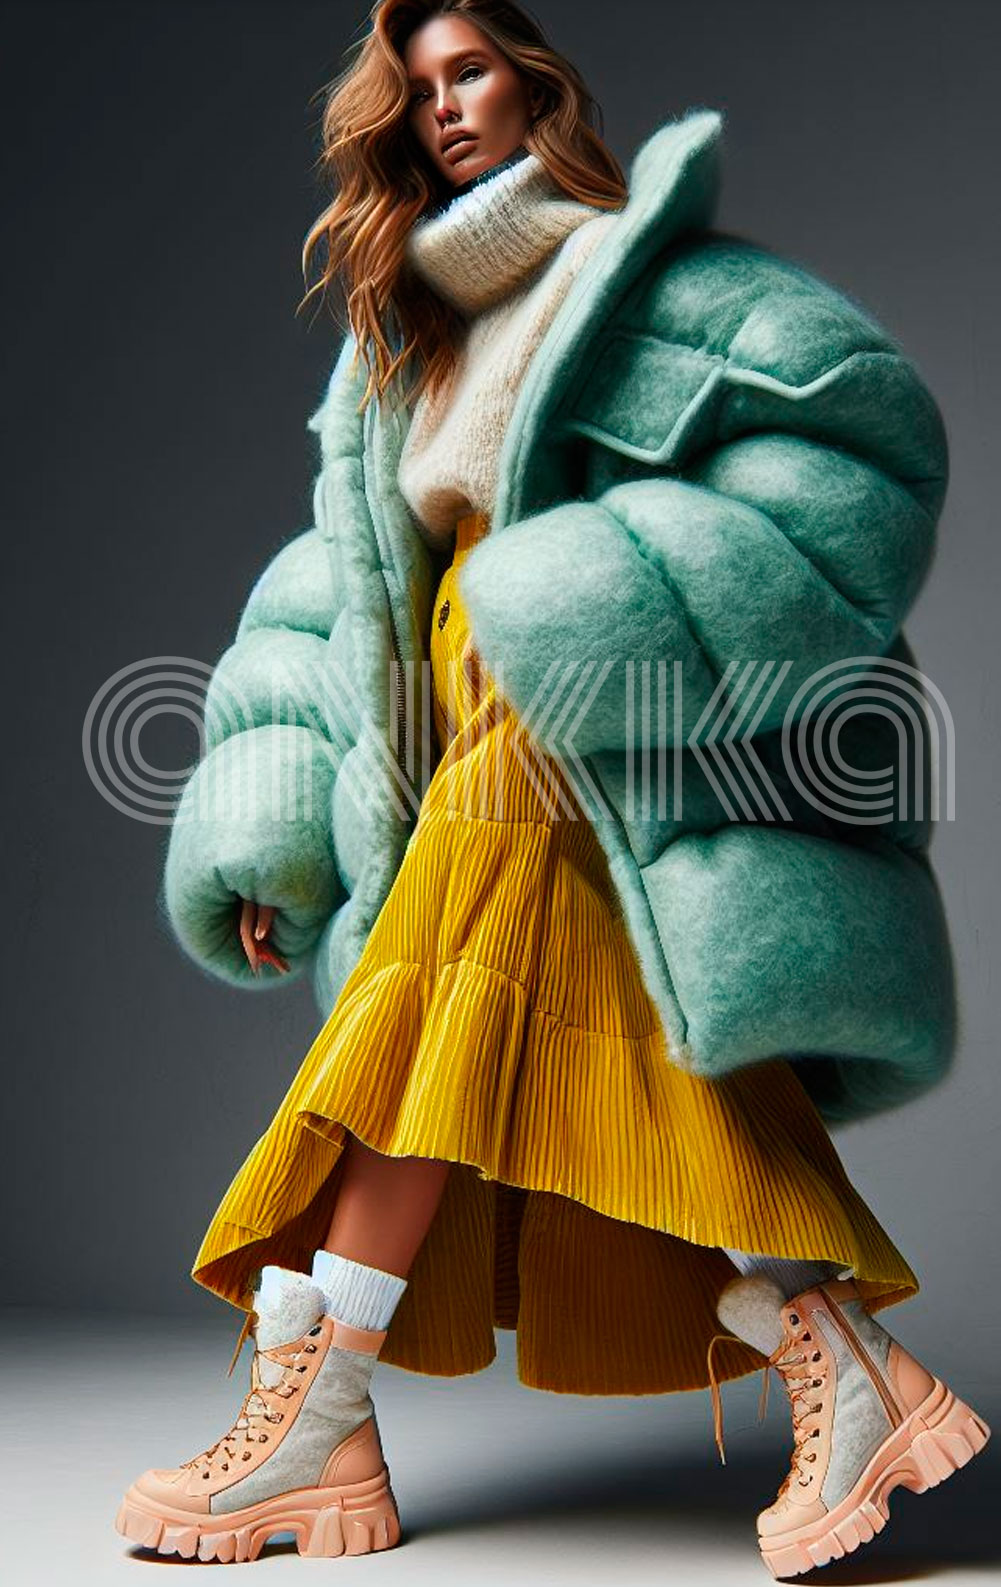 Down jacket made from felt yarn combined with a corduroy skirt